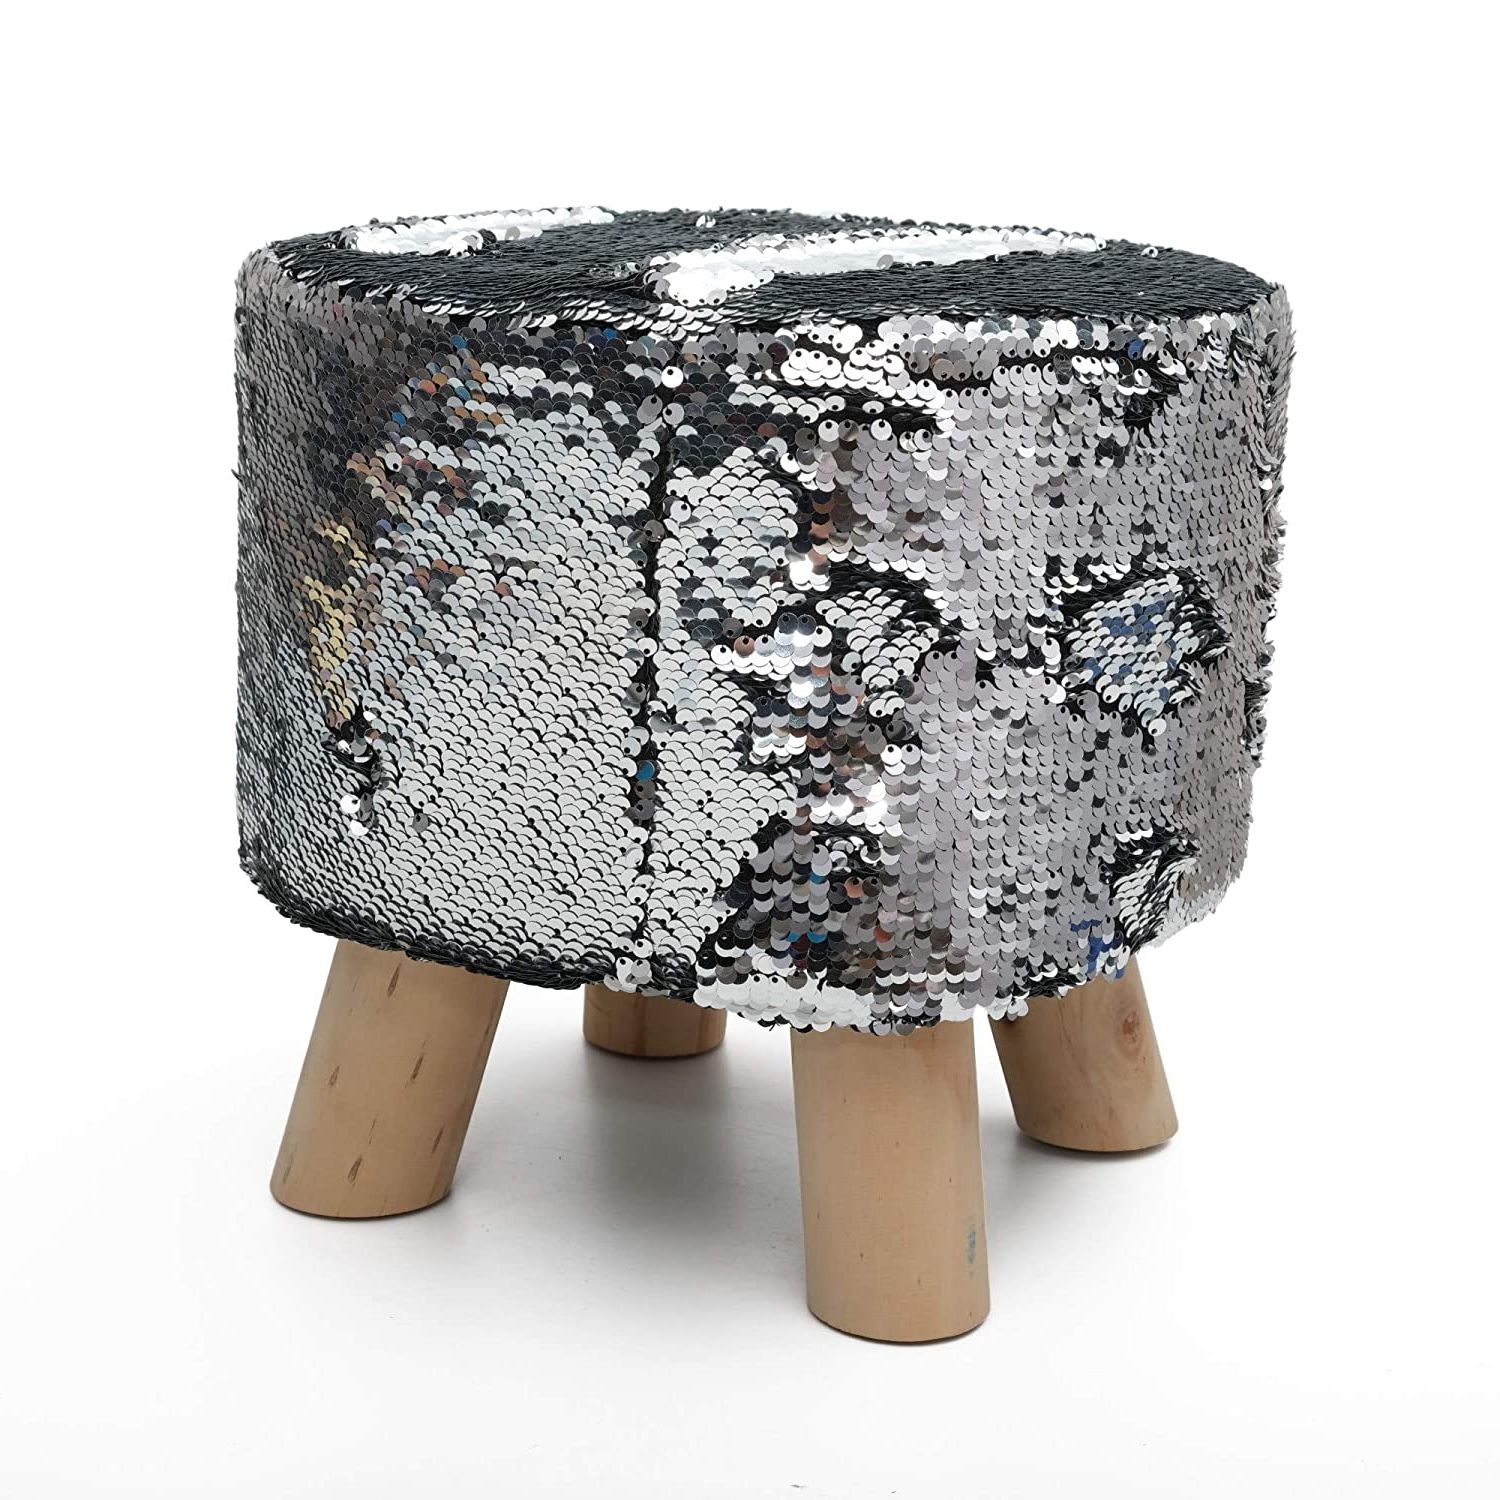 Preferred Ottomans With Sequins Regarding Store2508® Sequin Ottoman Cushion Footrest Stool Pouf With 4 Wooden Legs,  29 * 29 * 27 Cm. (silver) : Amazon (View 6 of 10)